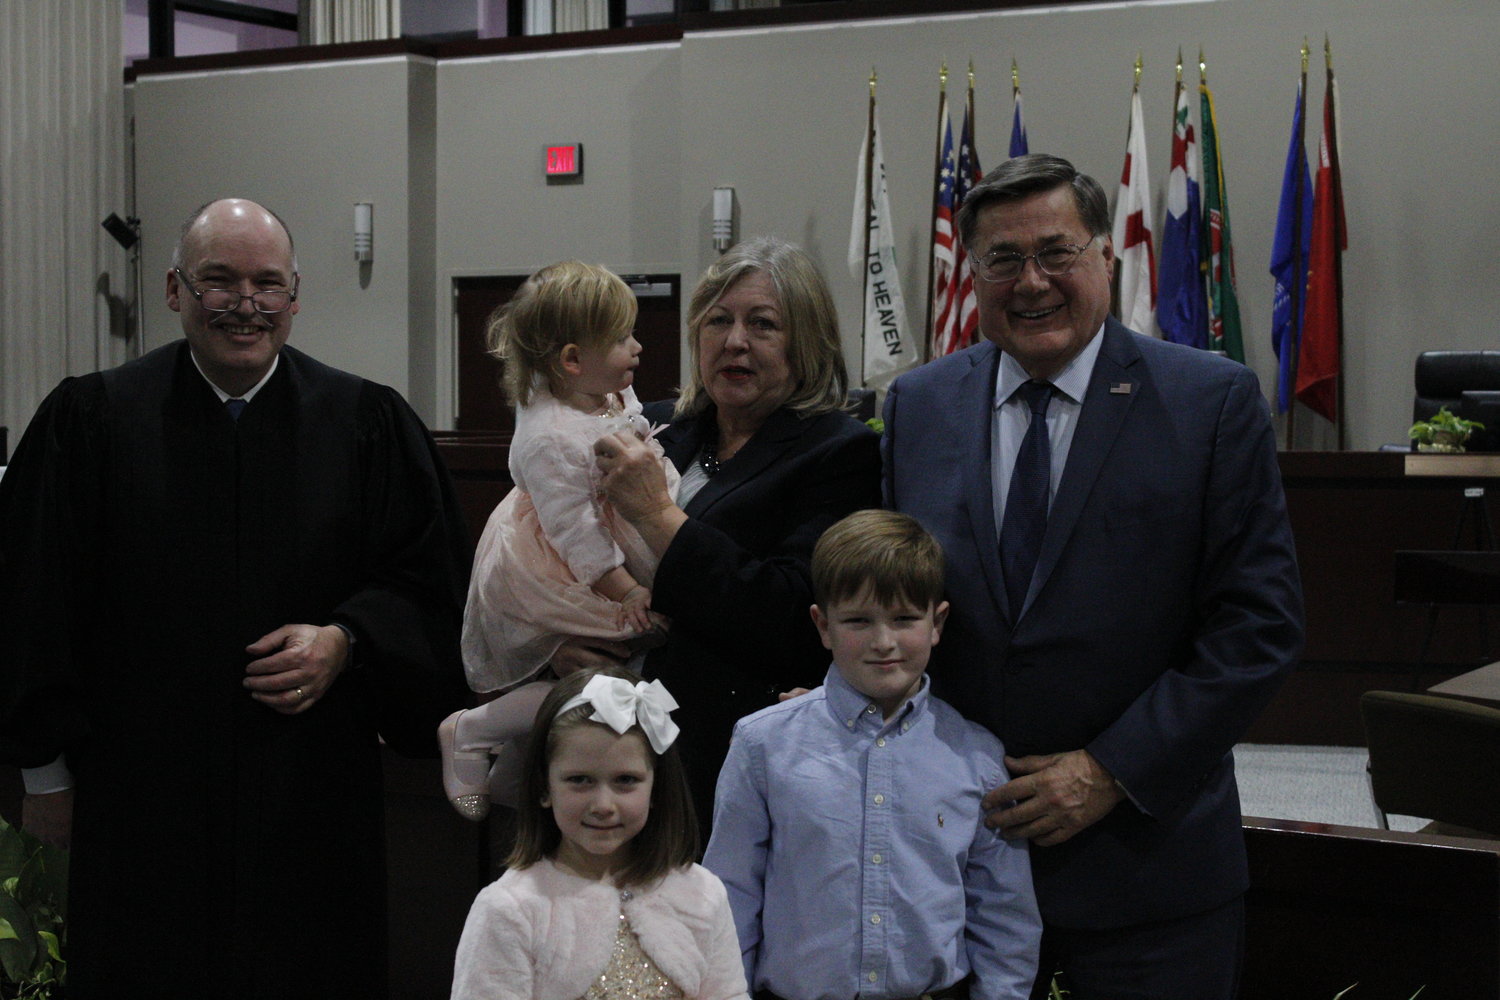 Newly sworn-in supervisor Ed Romaine with his wife and grandchildren.